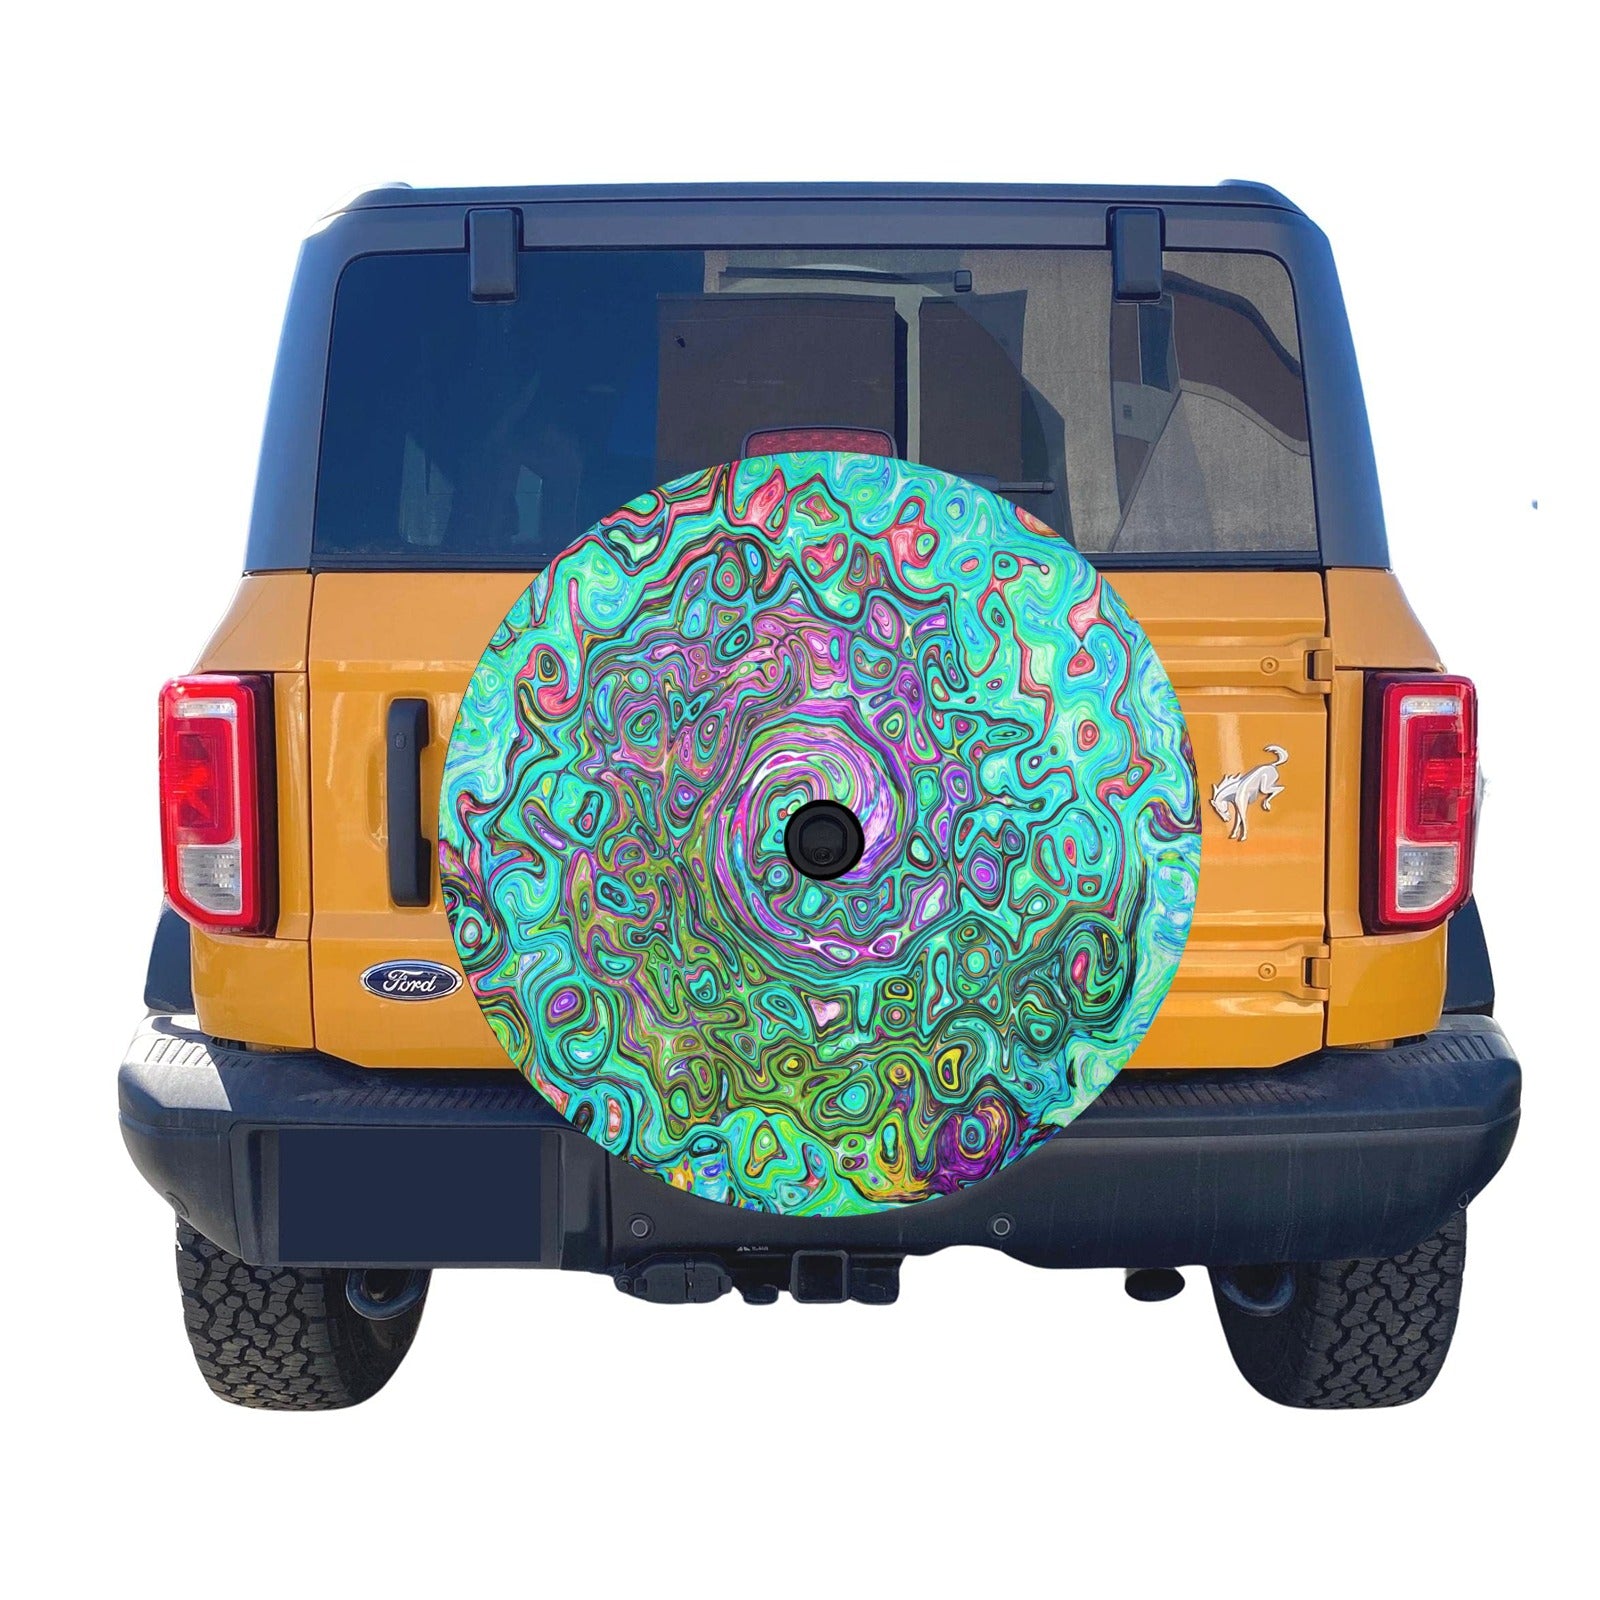 Spare Tire Cover with Backup Camera Hole - Aquamarine Groovy Abstract Retro Liquid Swirl - Small